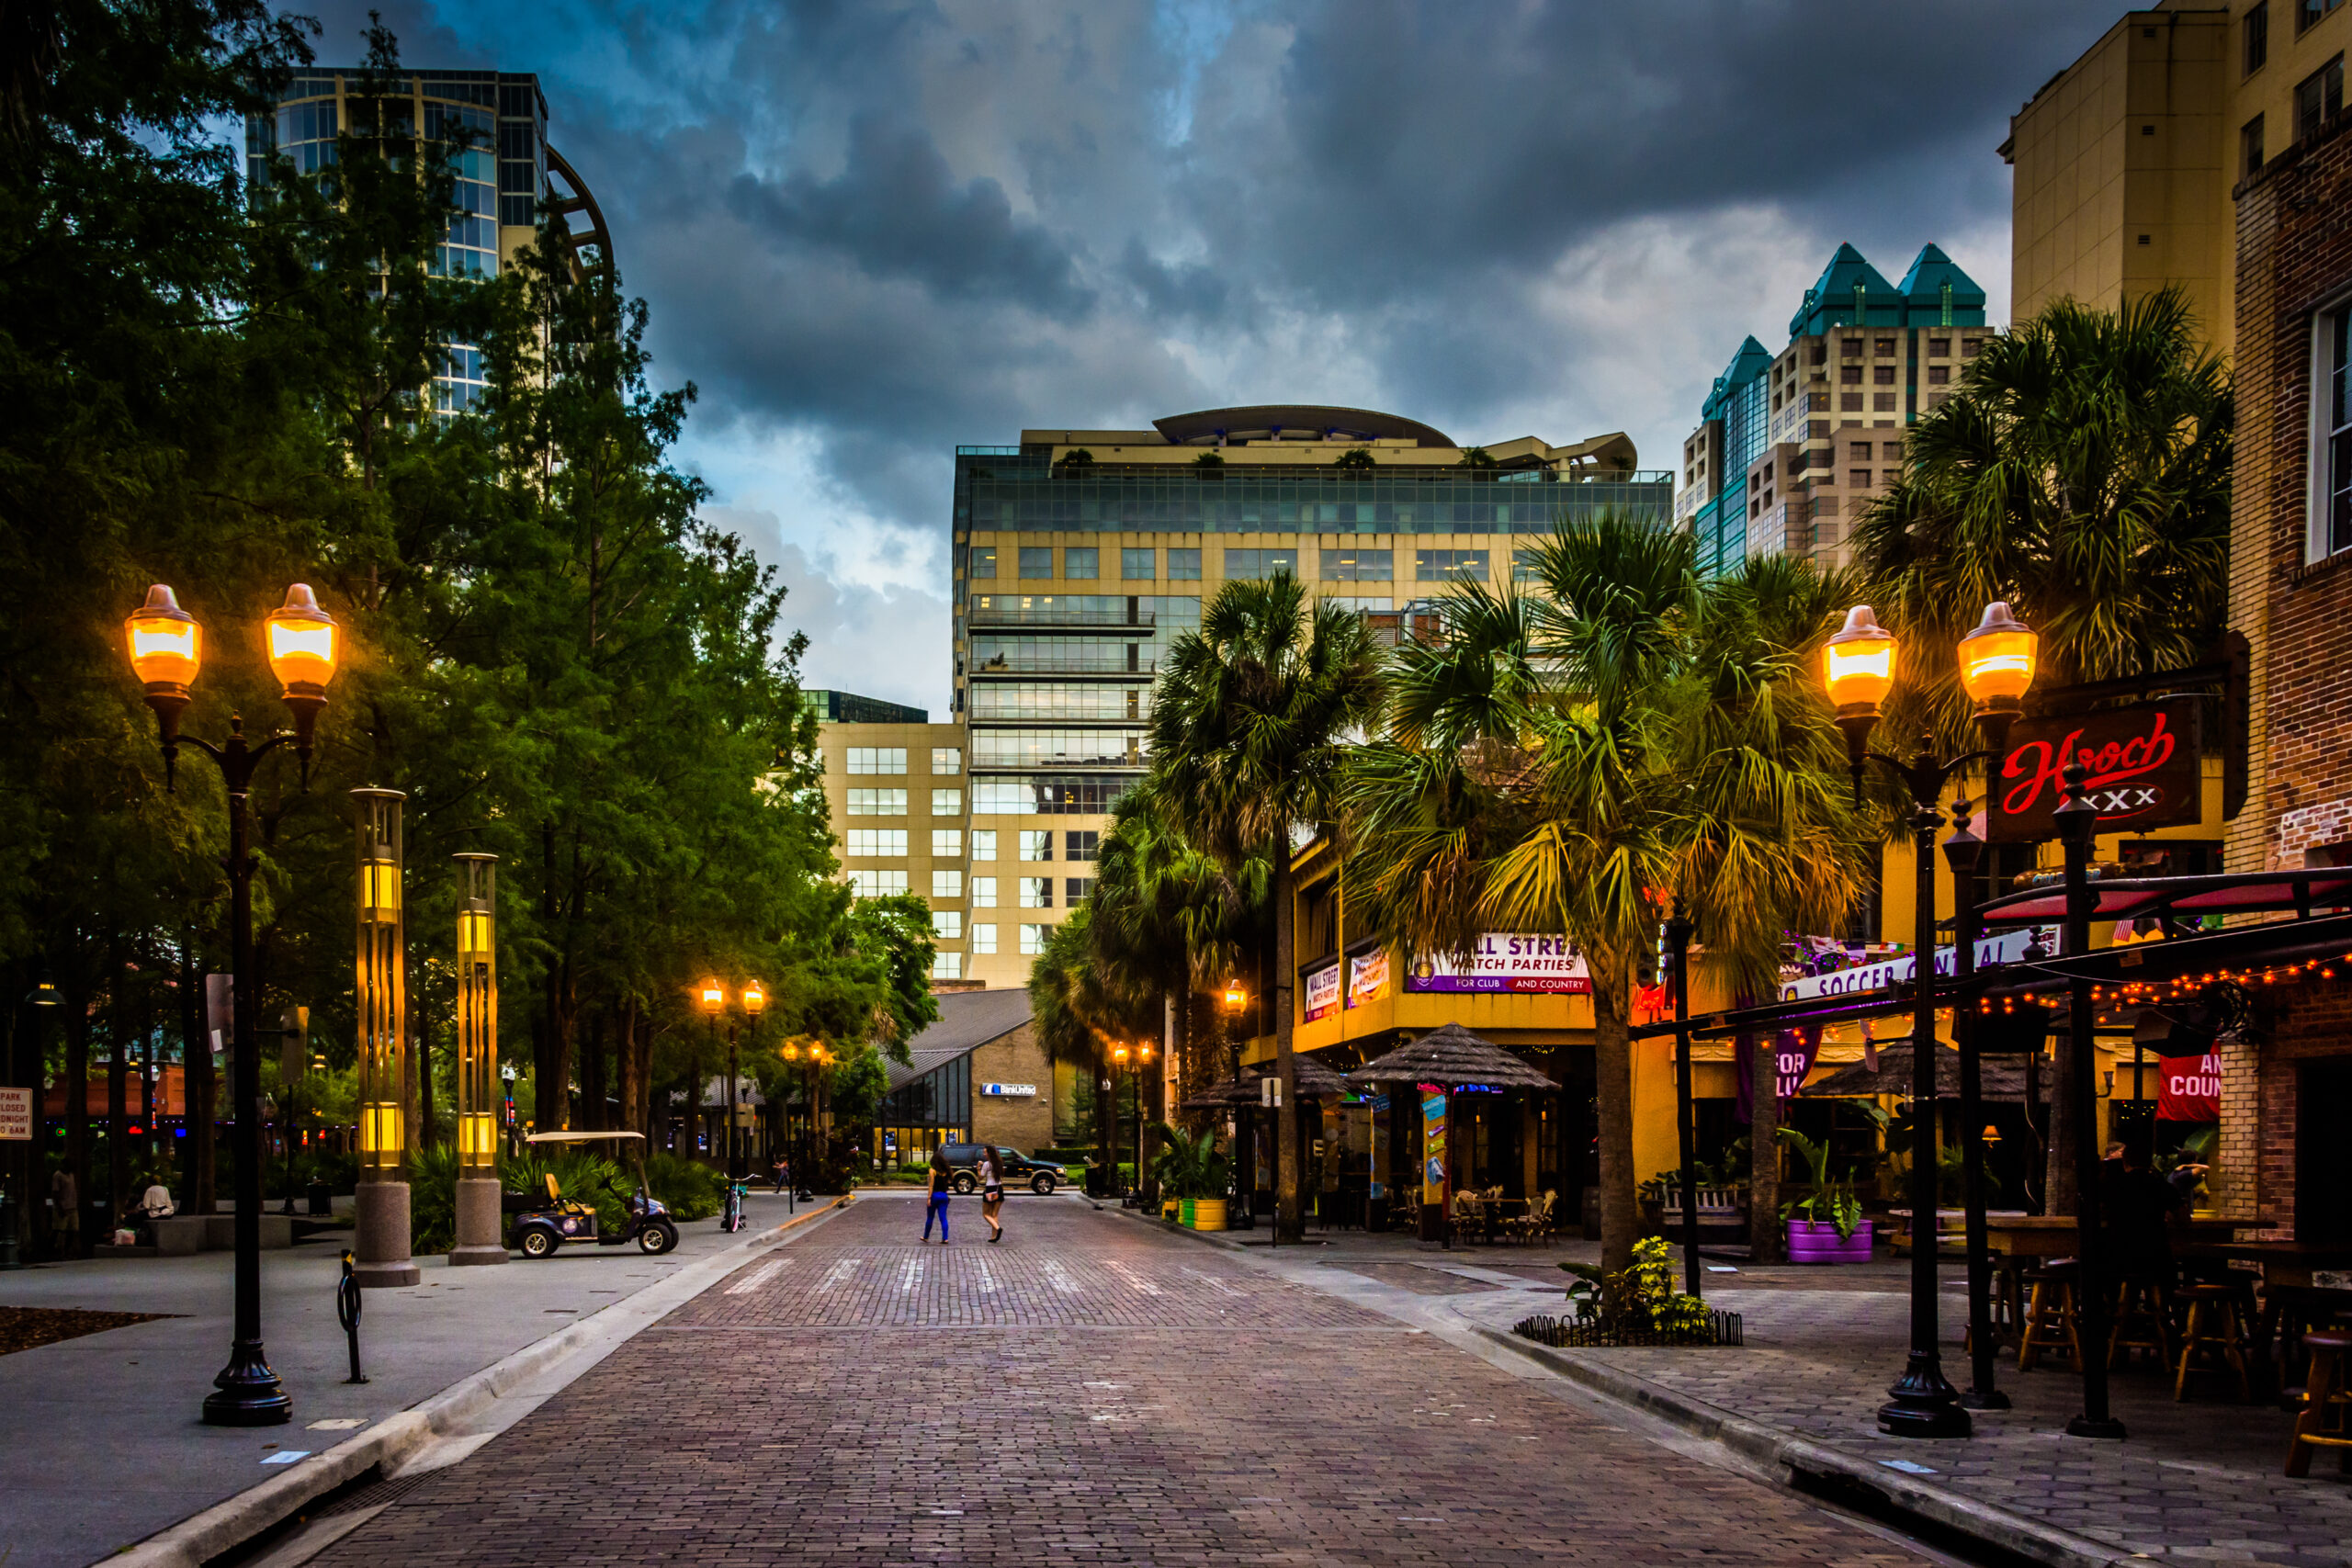 Storm clouds over a brick street in downtown Orlando, Florida.